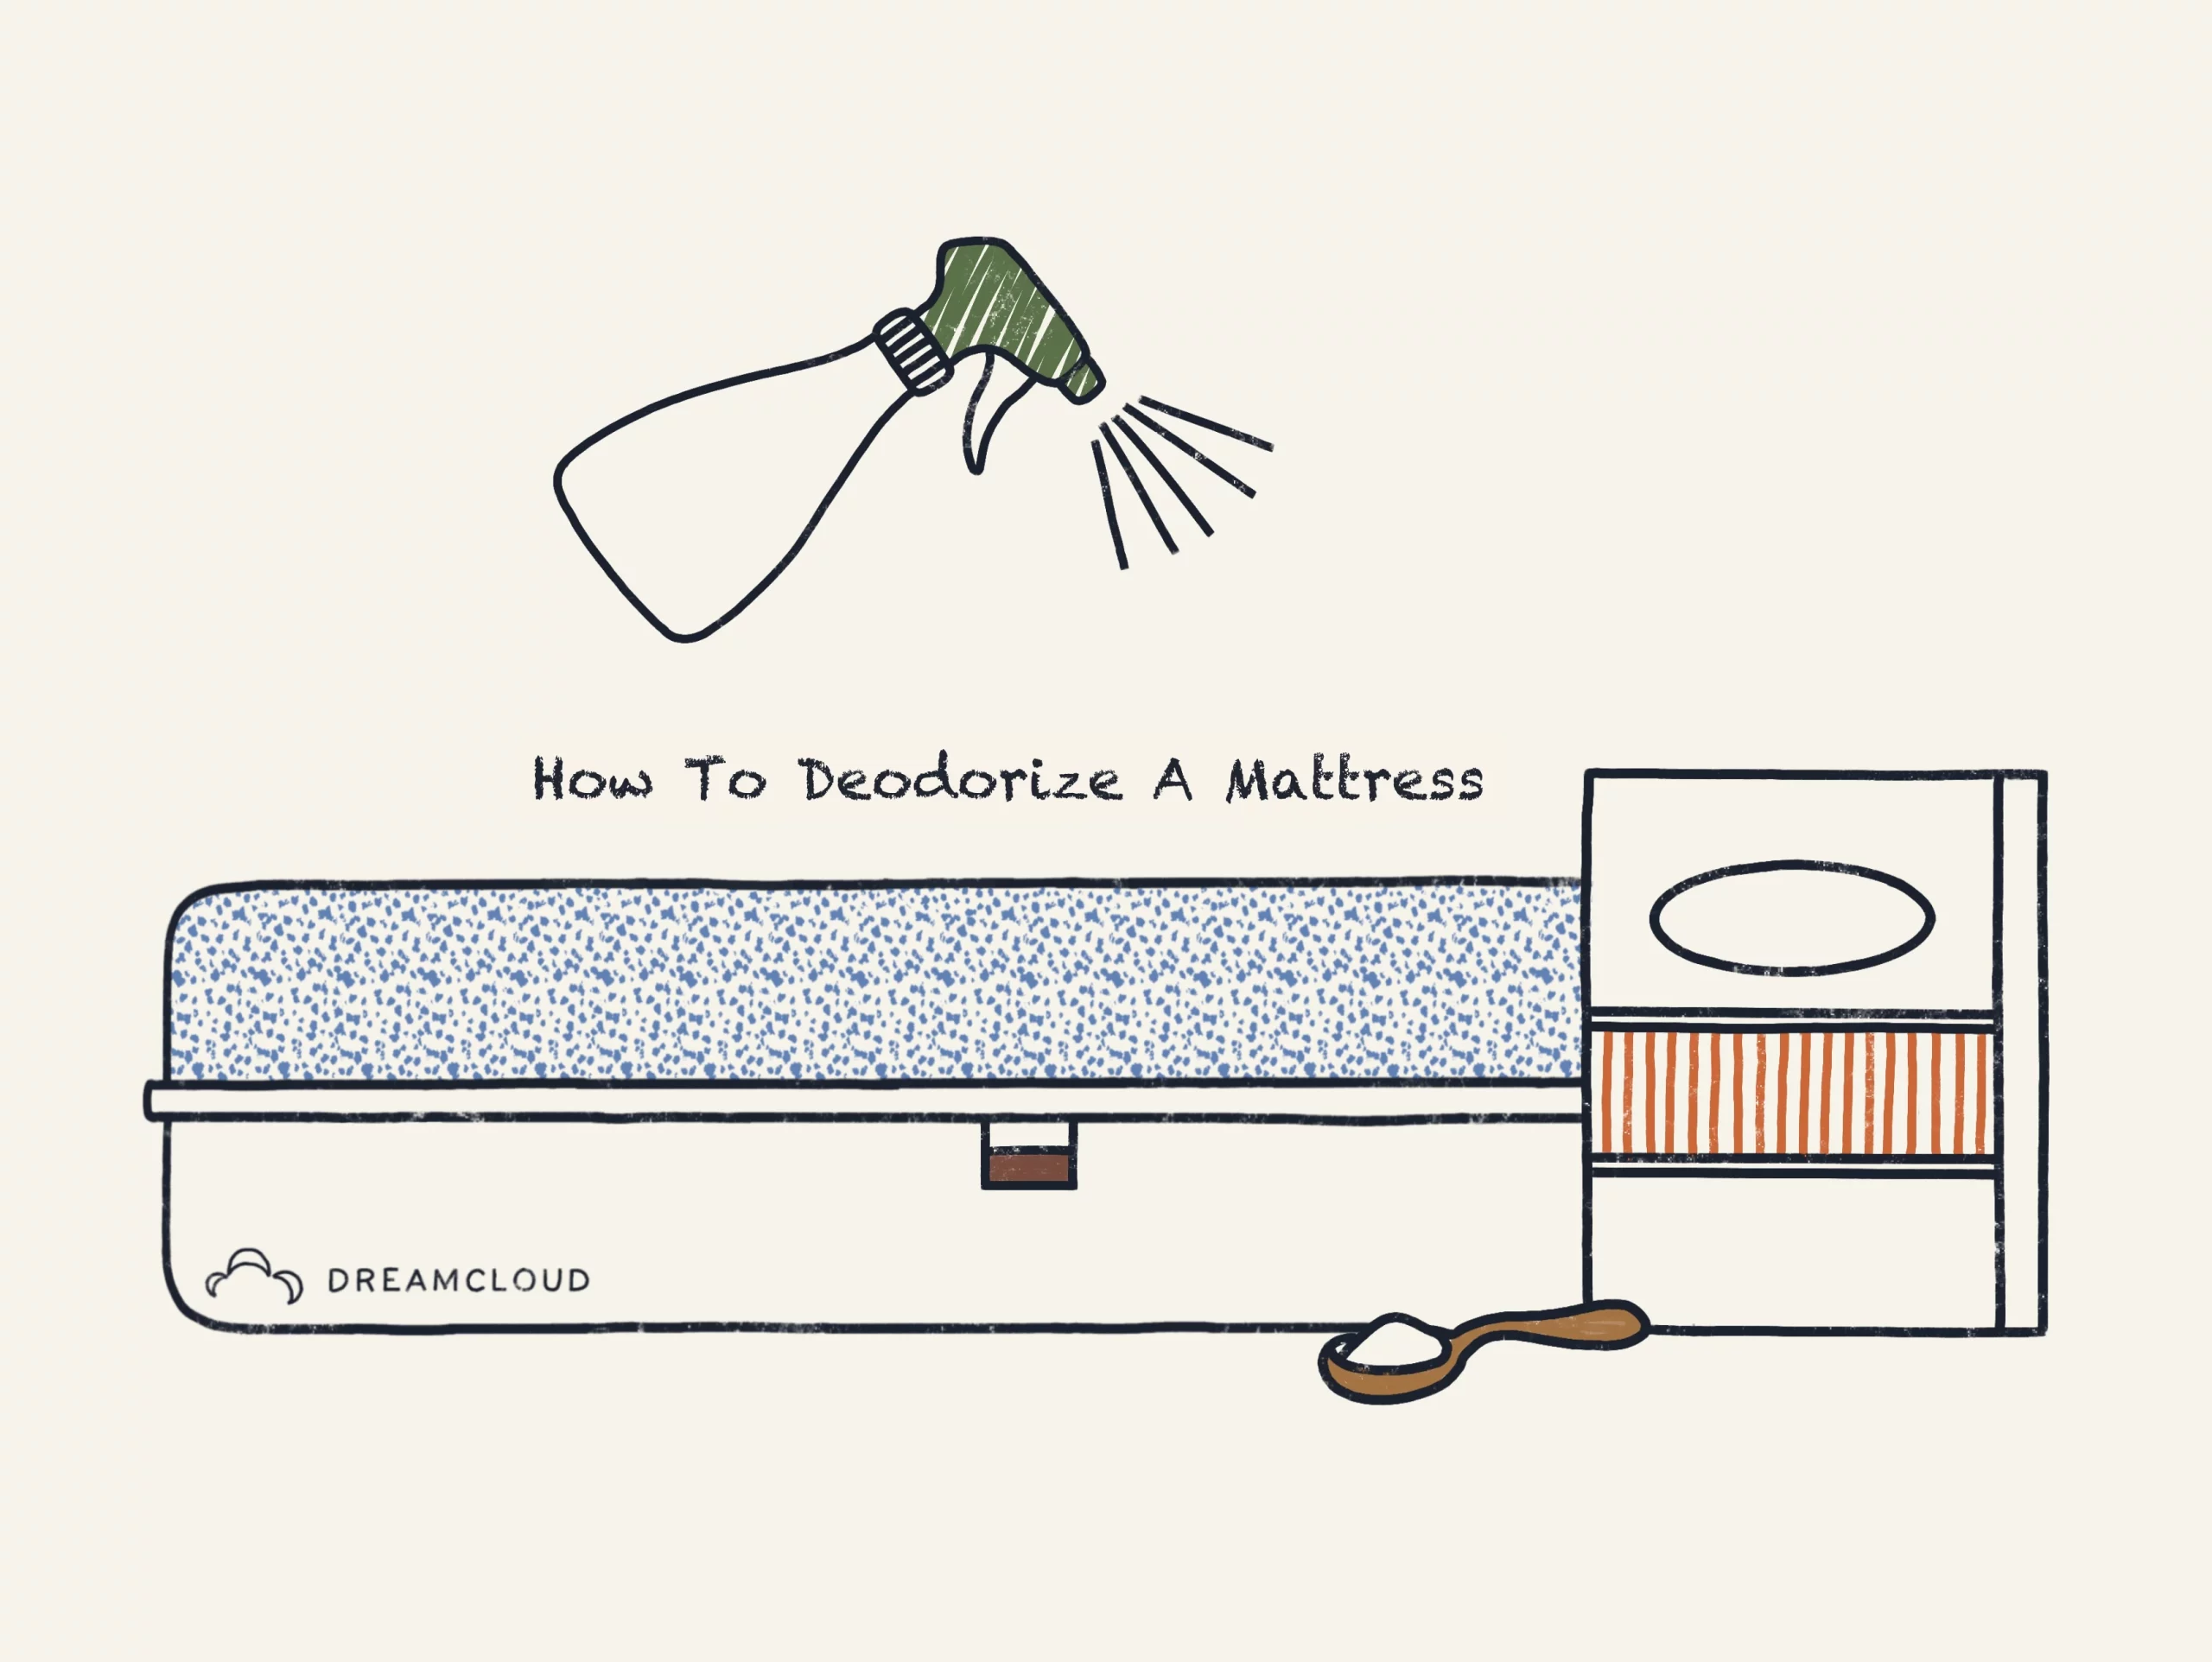 Illustration of How To Deodorize Mattress